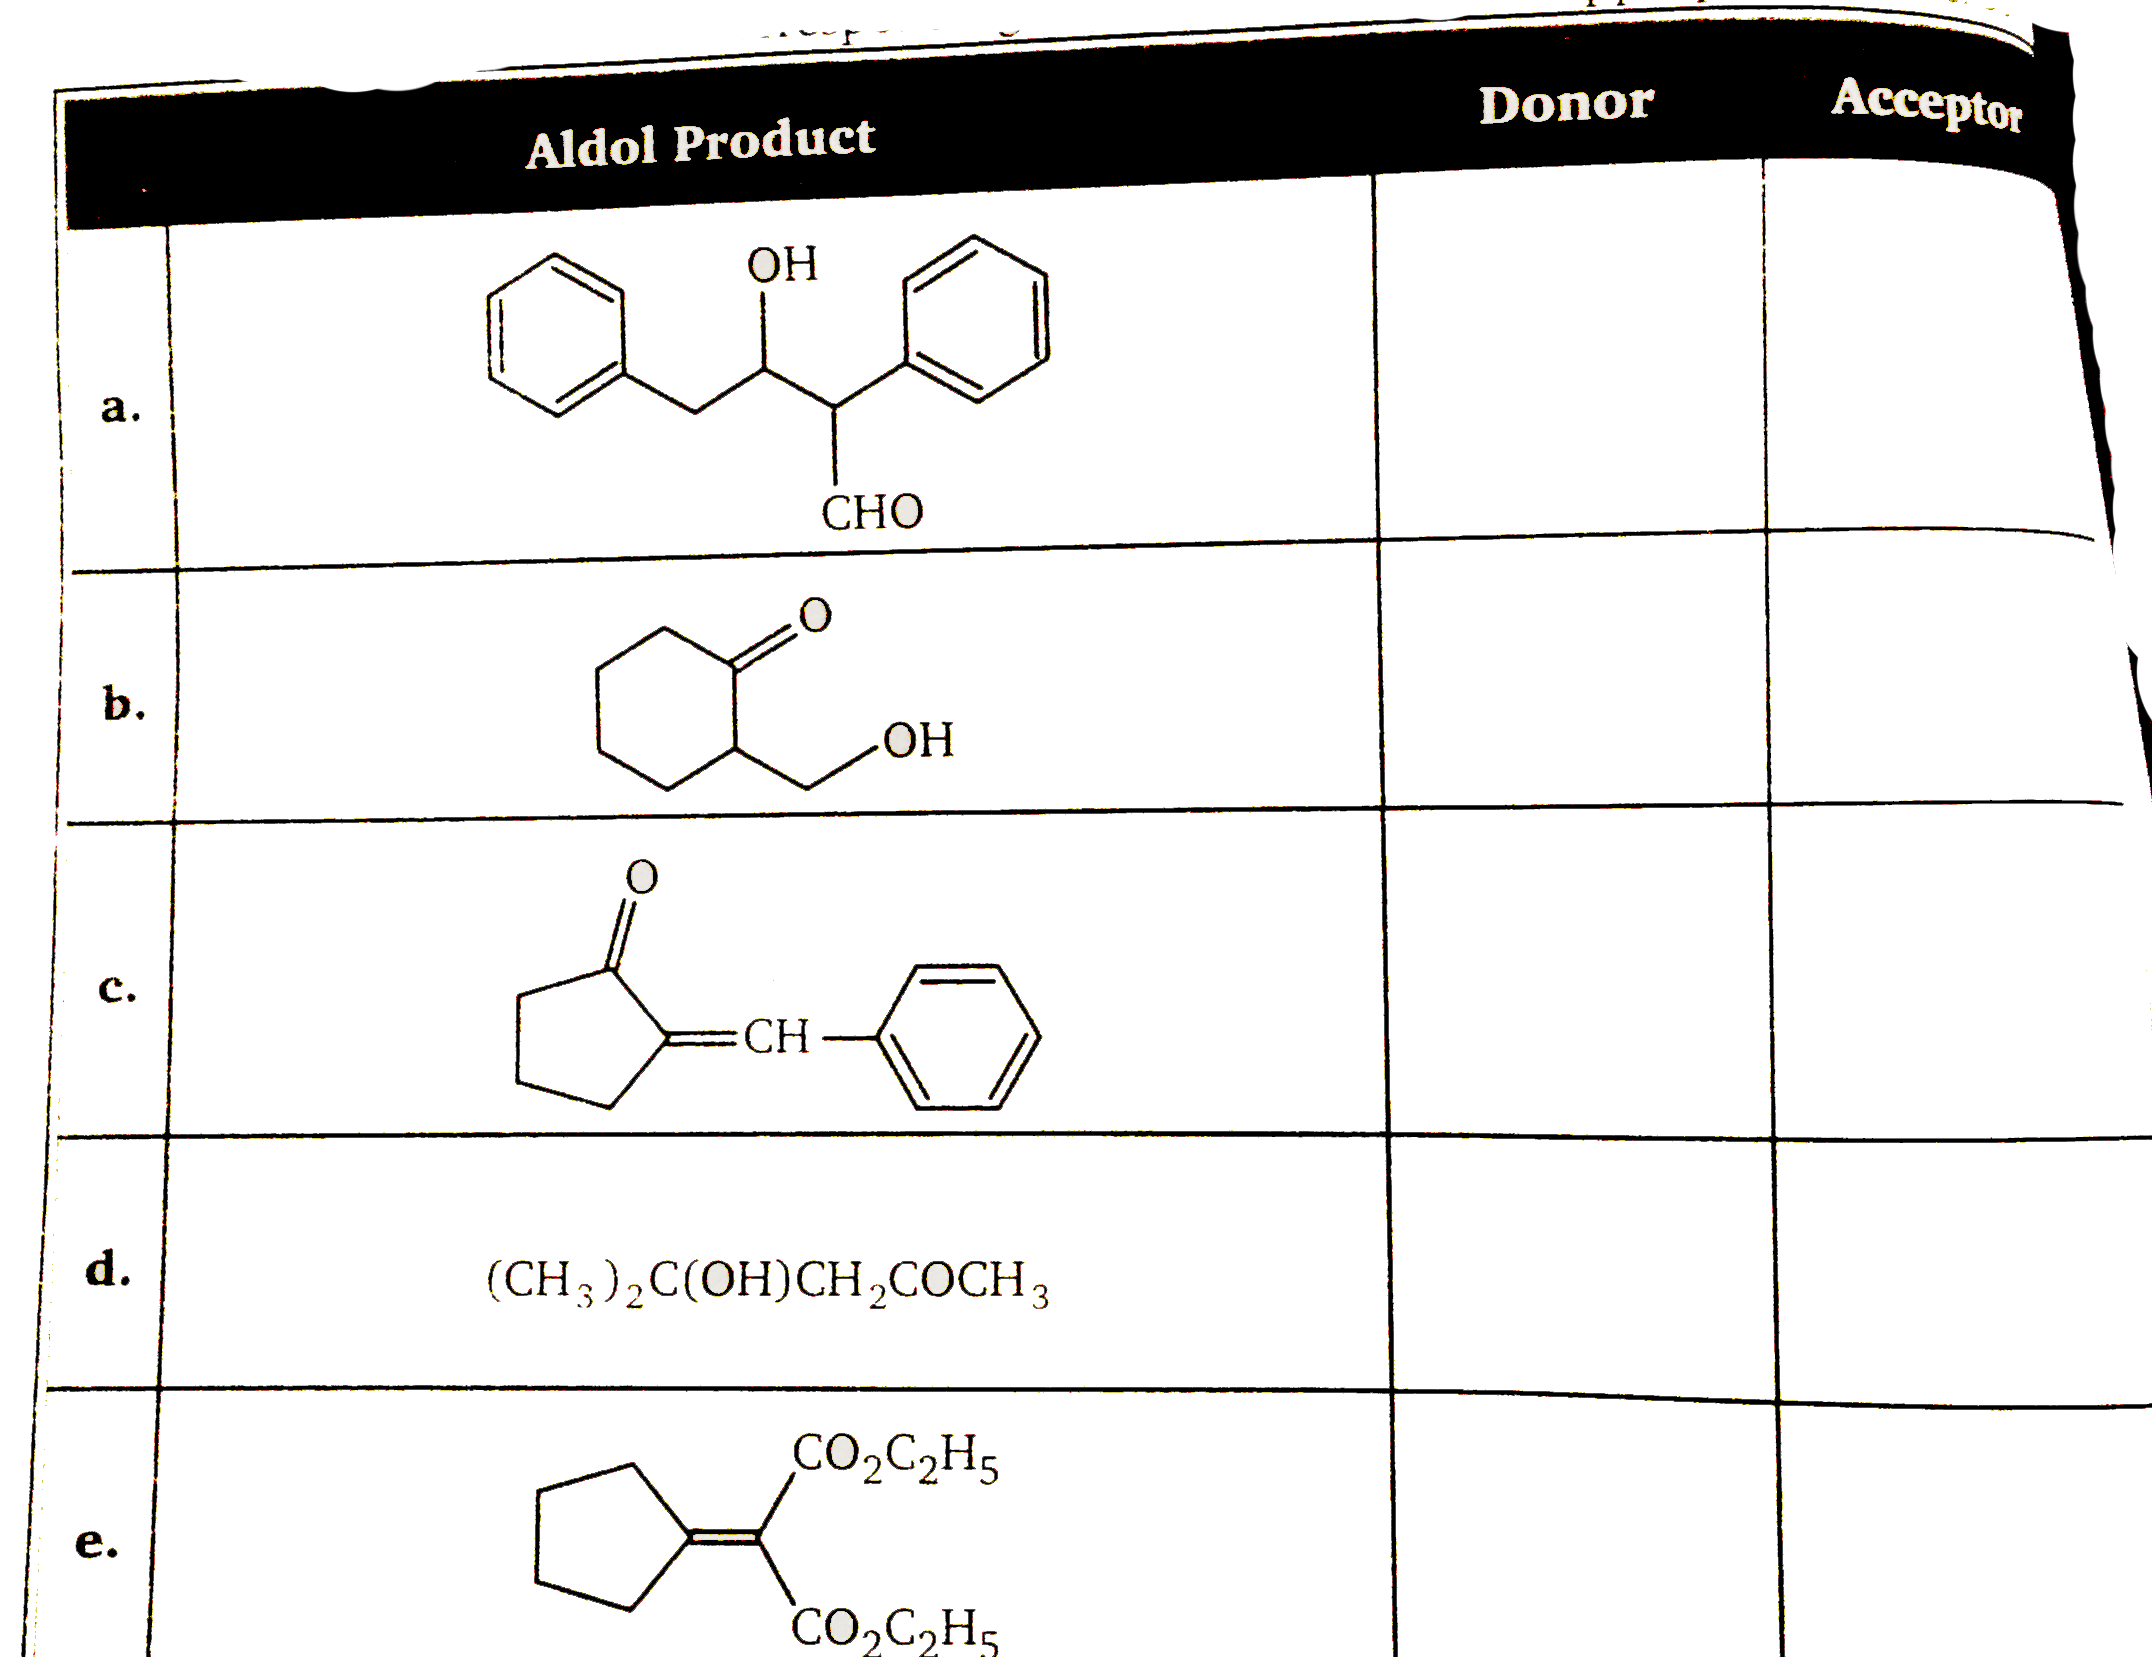 Aldol condensation proceeds by carbon-carbon bond formation between an enolate donor and a carbonyl acceptor. For each of the  following aldol products (a thorugh e) select a donor and an acceptor compound from the list at the bottom of the page (compounds A through H). write the letter corresponding to your selection in the appropriate answer box.   .   Q.